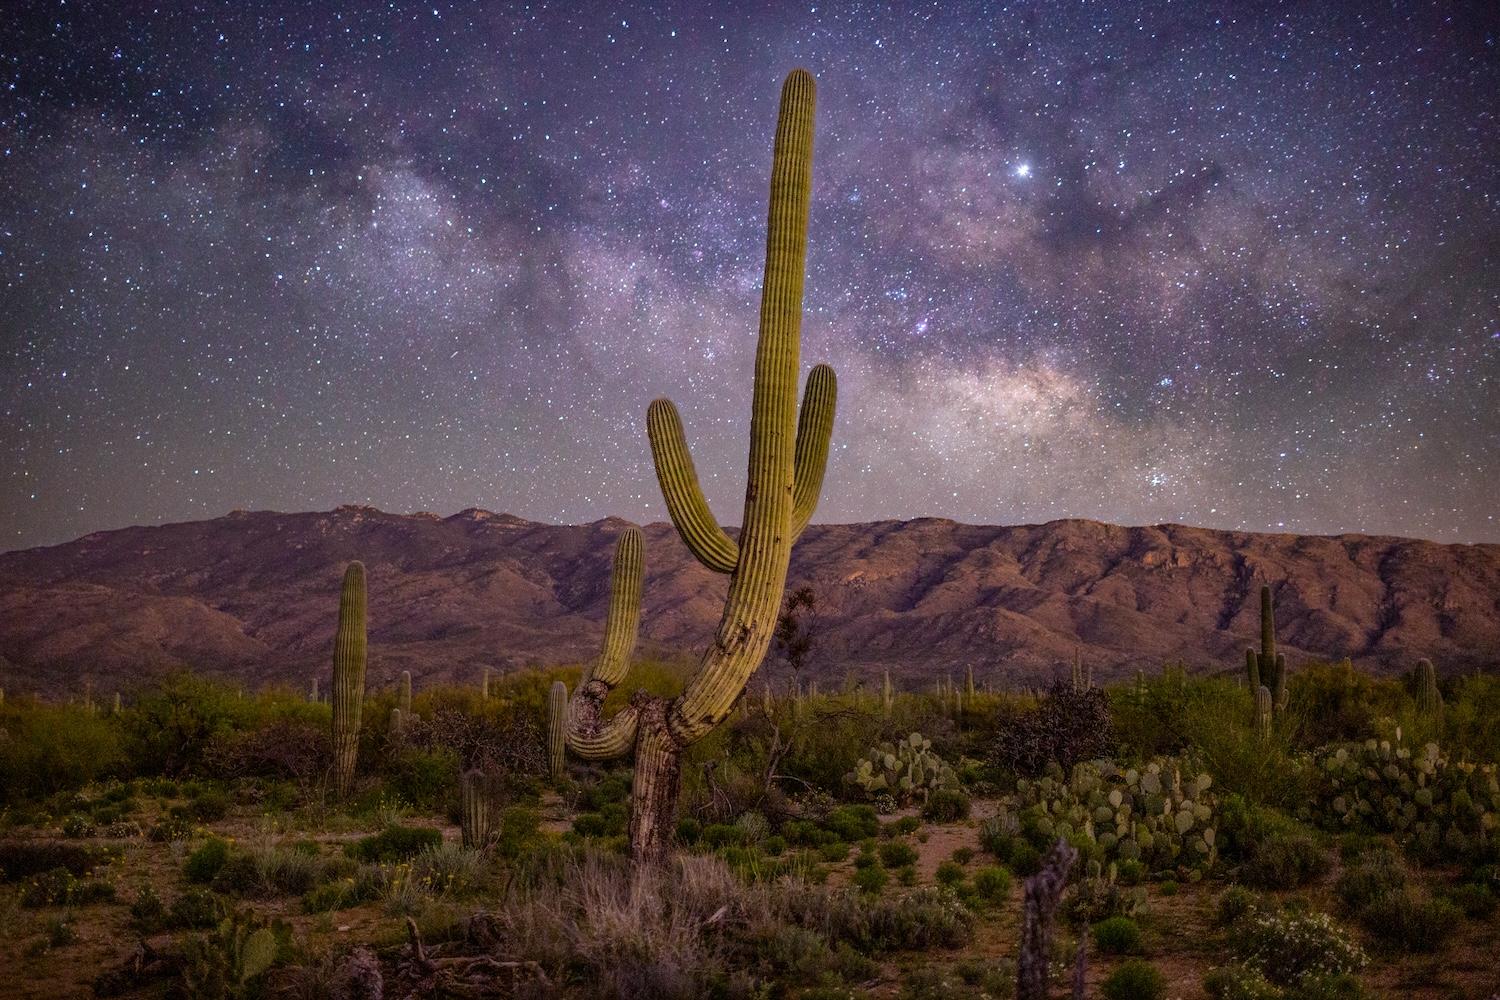 The night sky dazzles in Saguaro National Park in Tucson, Arizona. It has been certified as an Urban Night Sky Place.